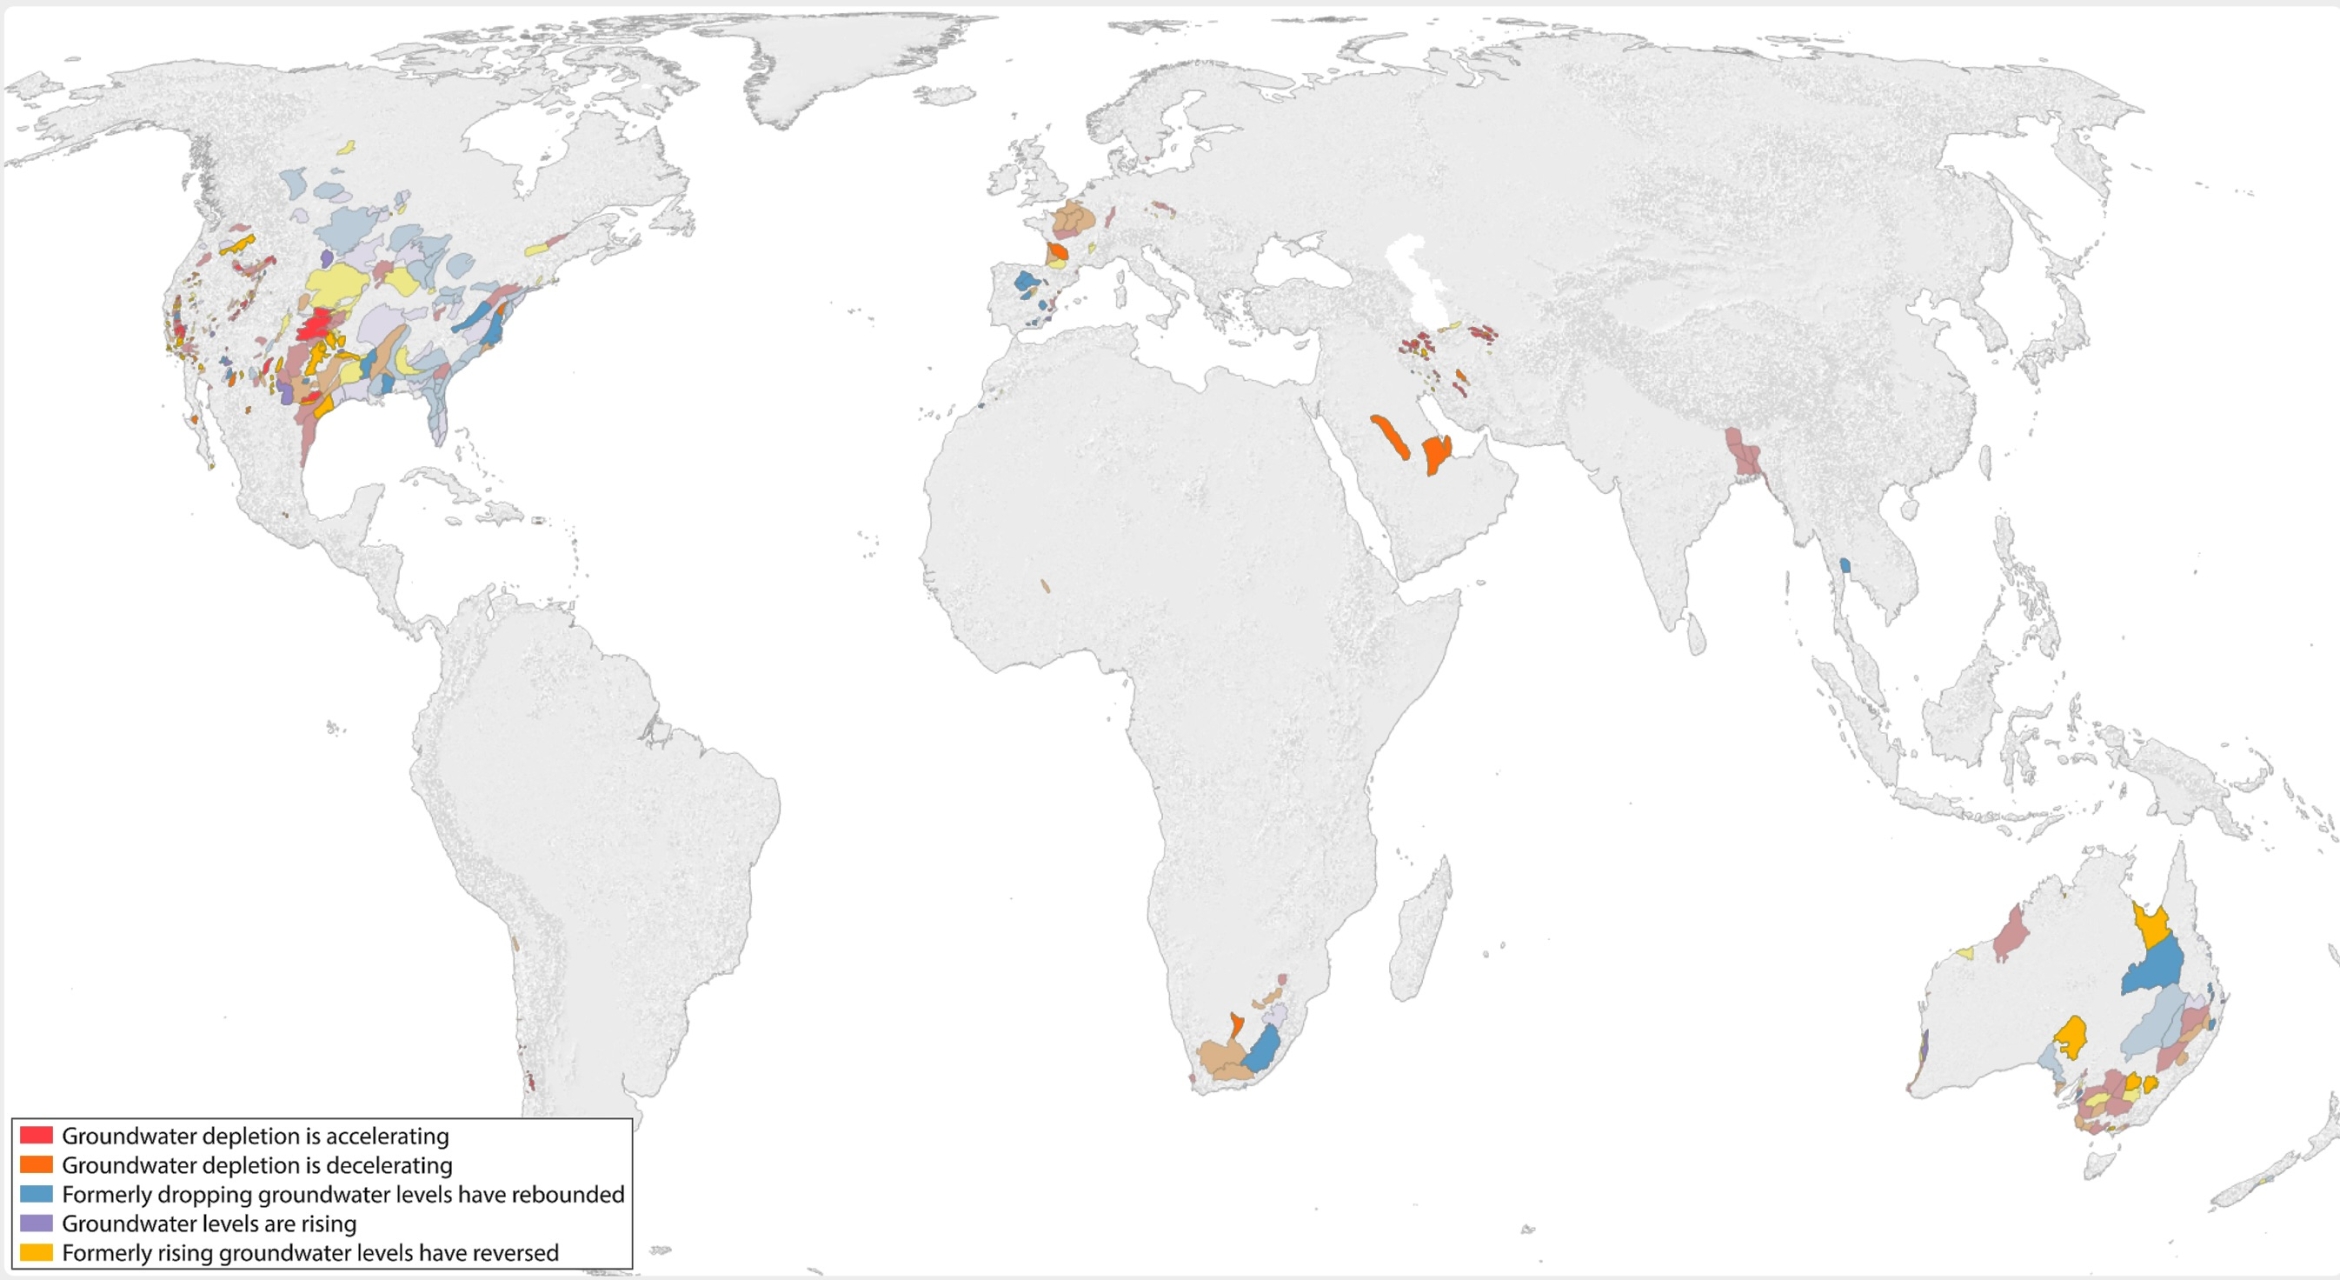 A map showing trends in groundwater levels around the globe.